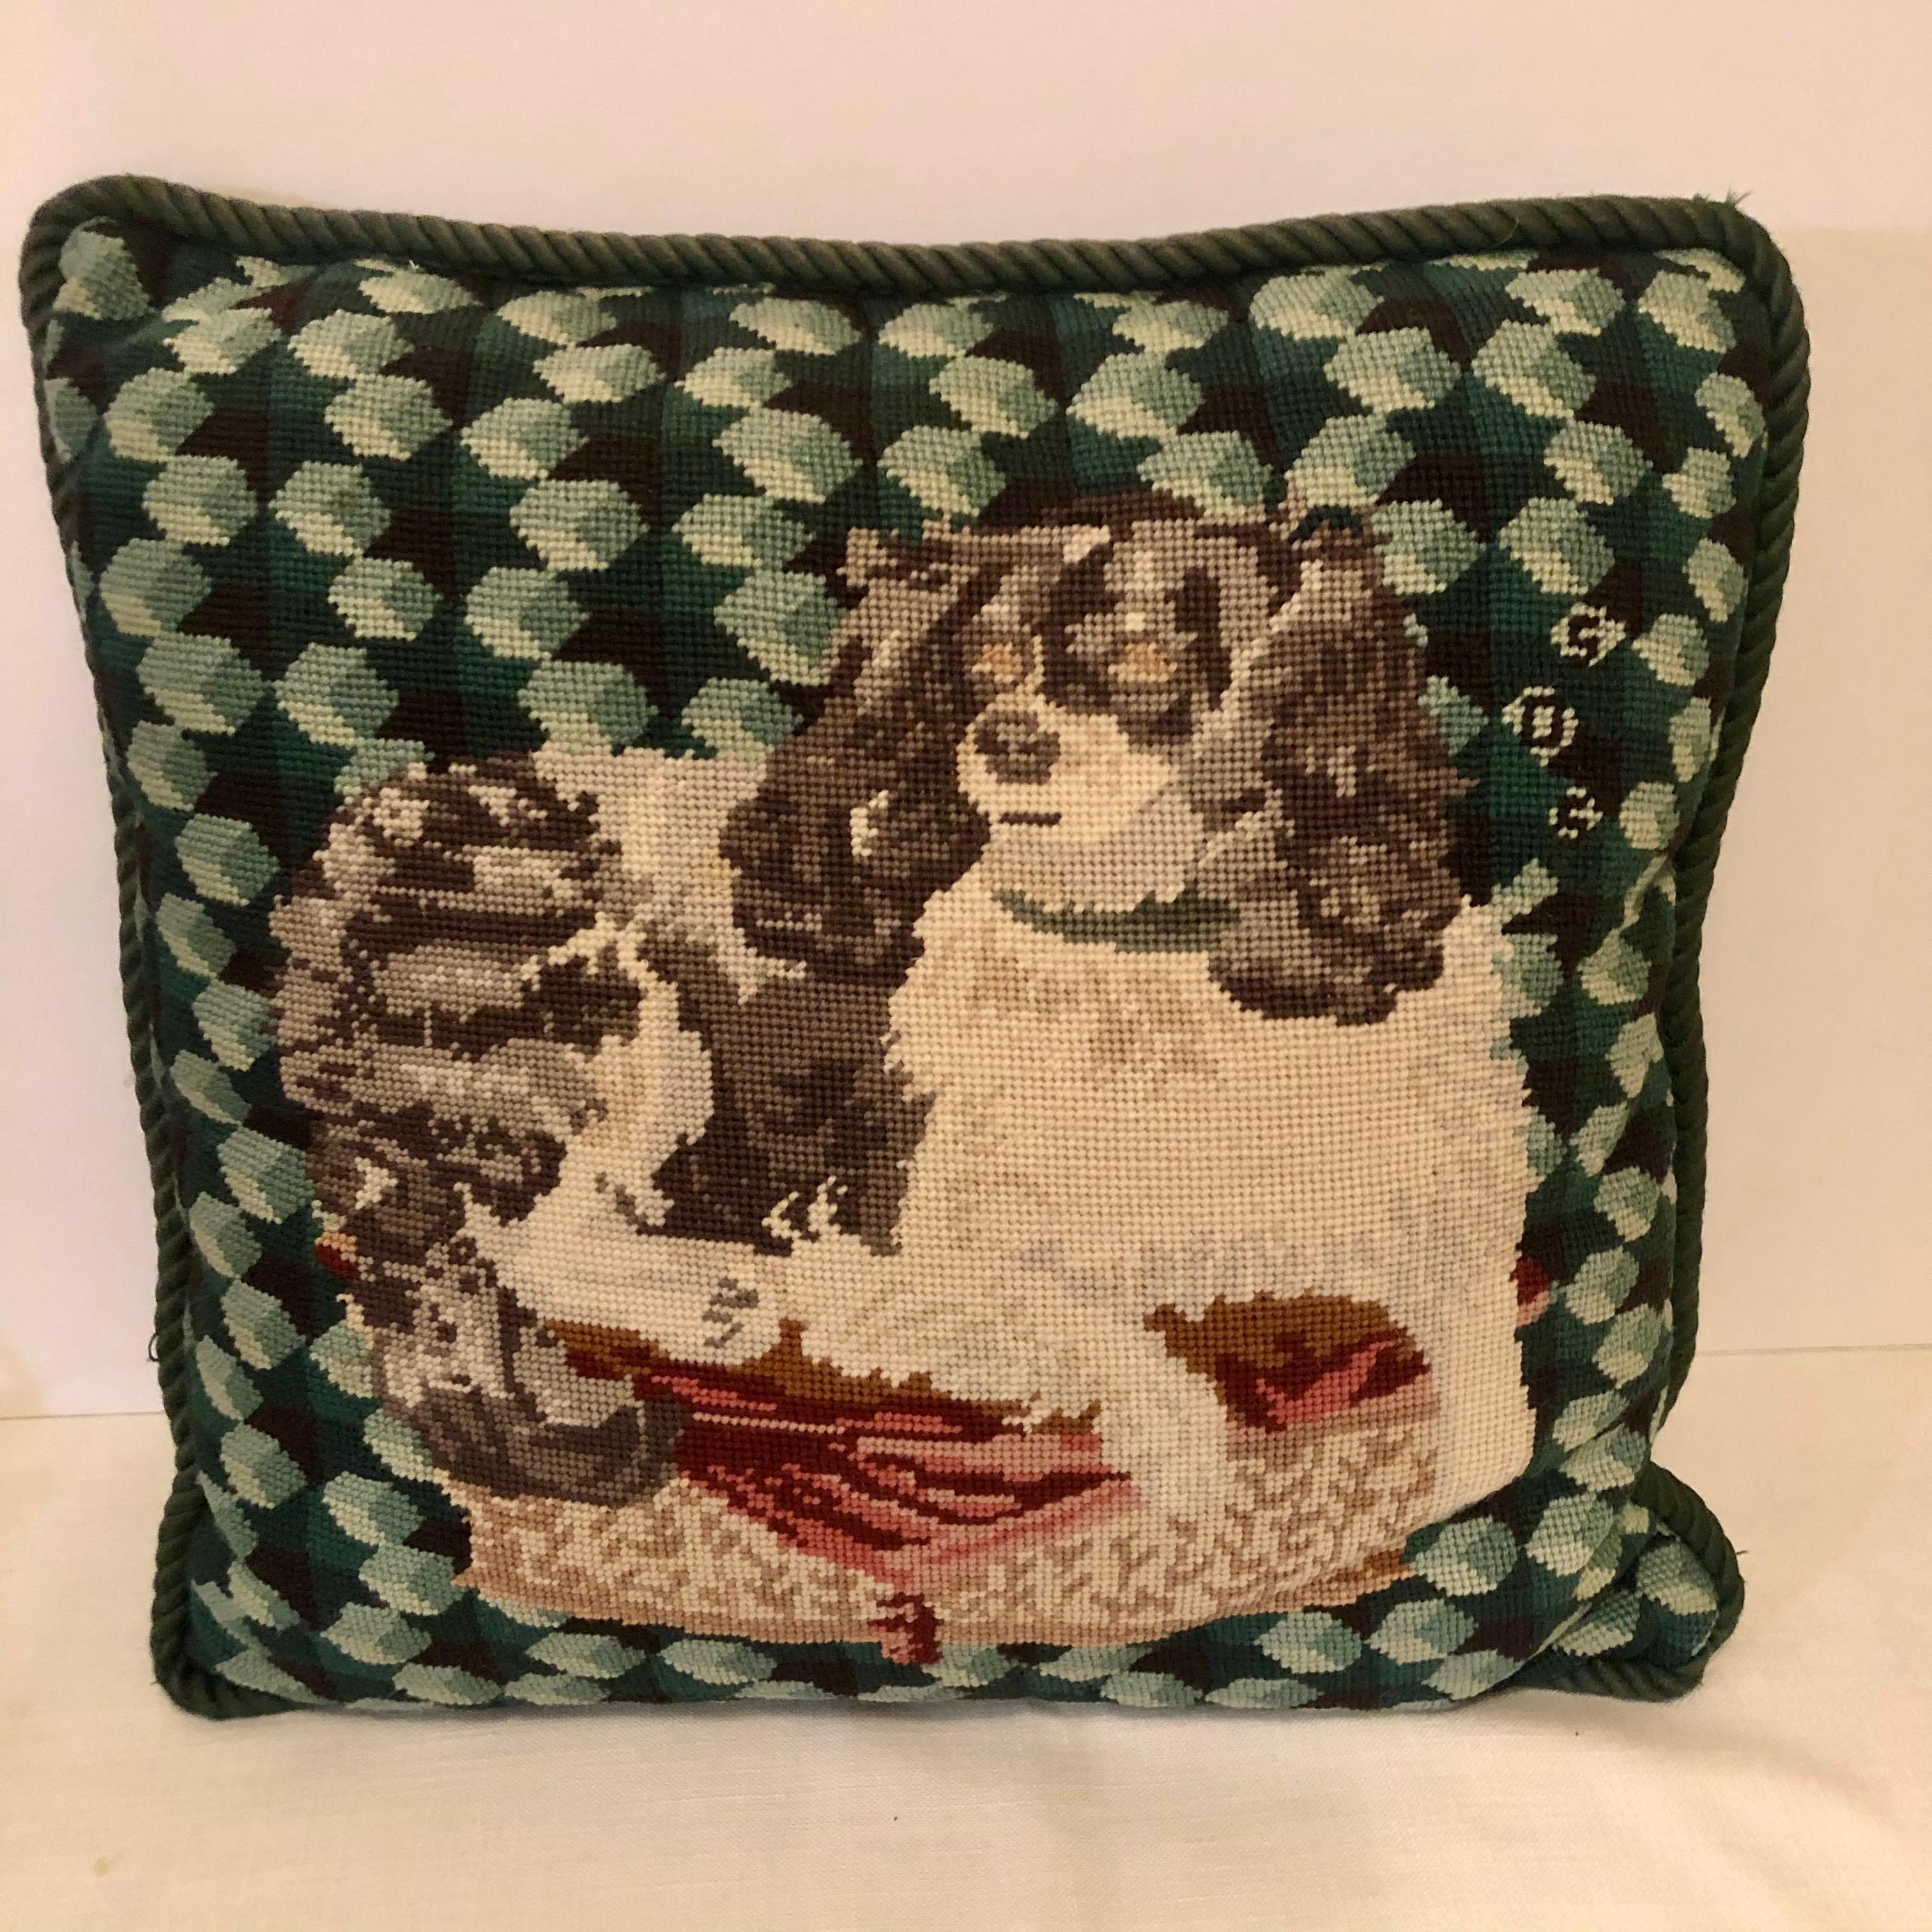 This is a charming pillow with a needlepoint of a black and white cavalier King Charles spaniel. This would be a wonderful decoration for any dog lover. The back of this pillow has green velvet fabric. It is 20 inches wide and 19 inches deep. Price